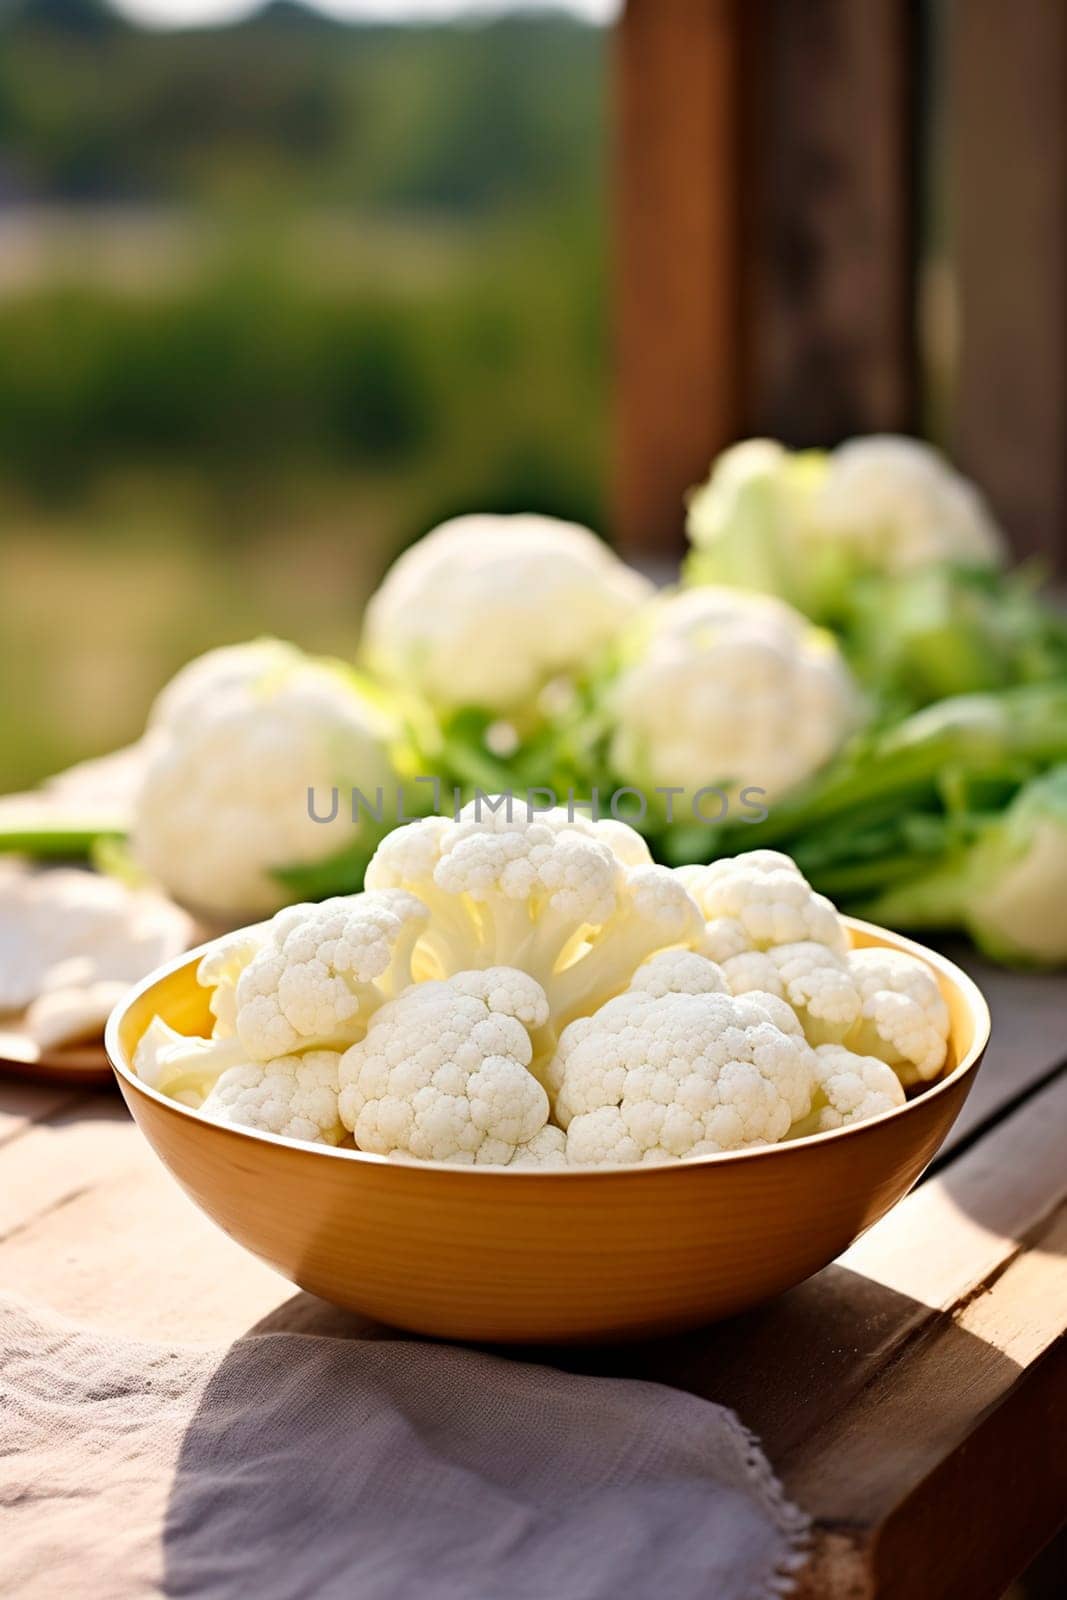 Cauliflower in a bowl against the backdrop of the garden. Selective focus. Nature.